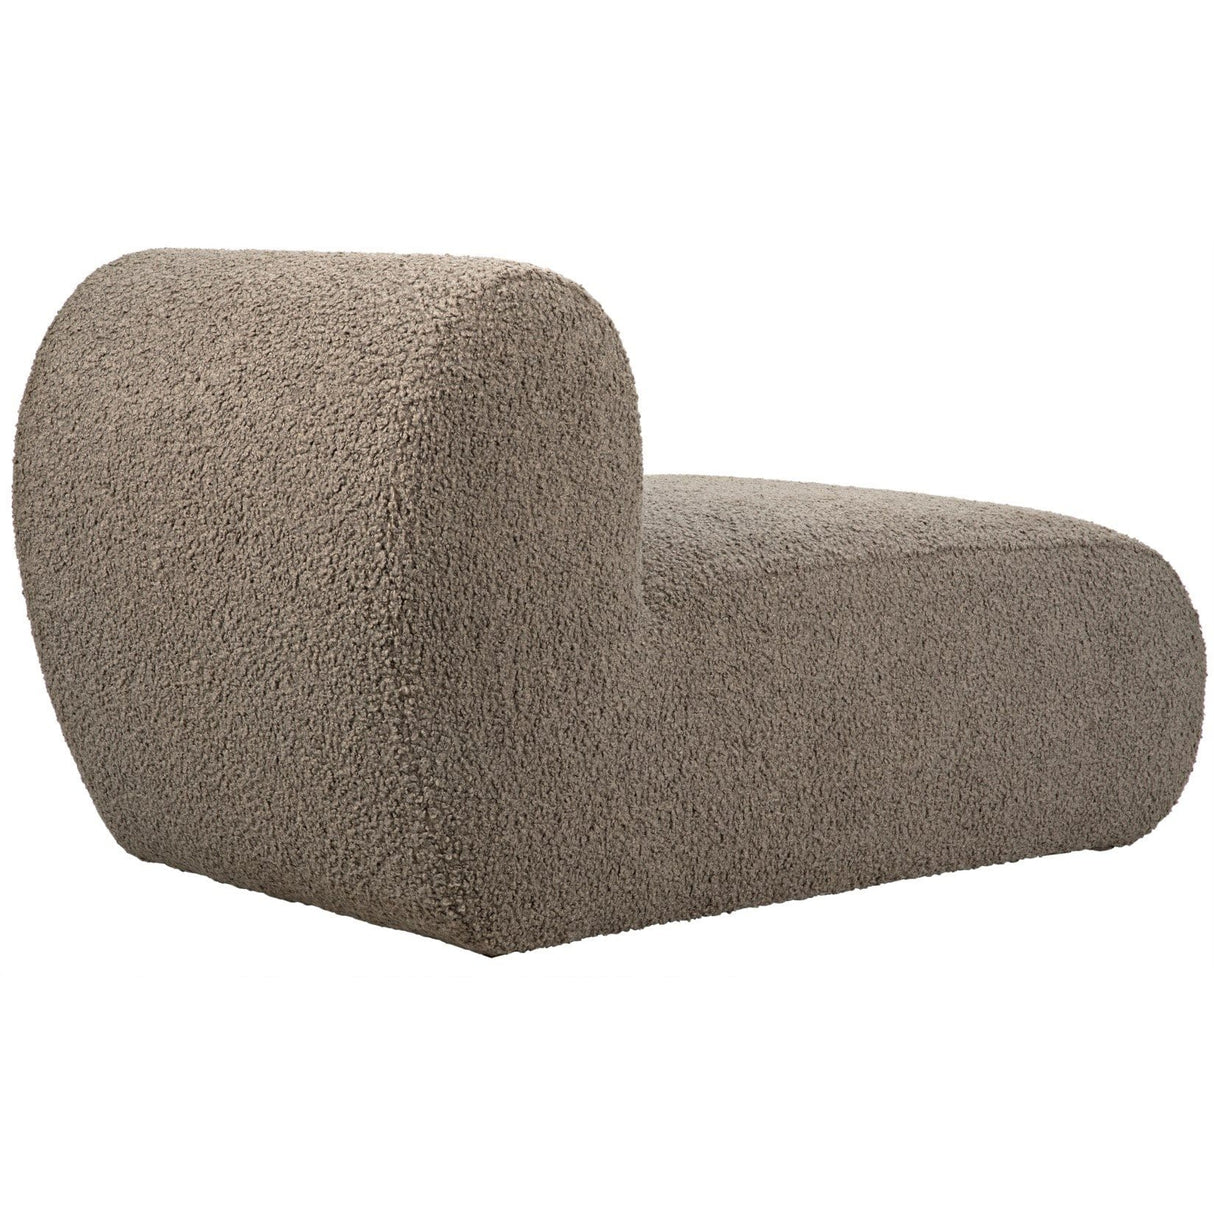 CFC Marshmallow Chaise Lounge Furniture cfc-UP169